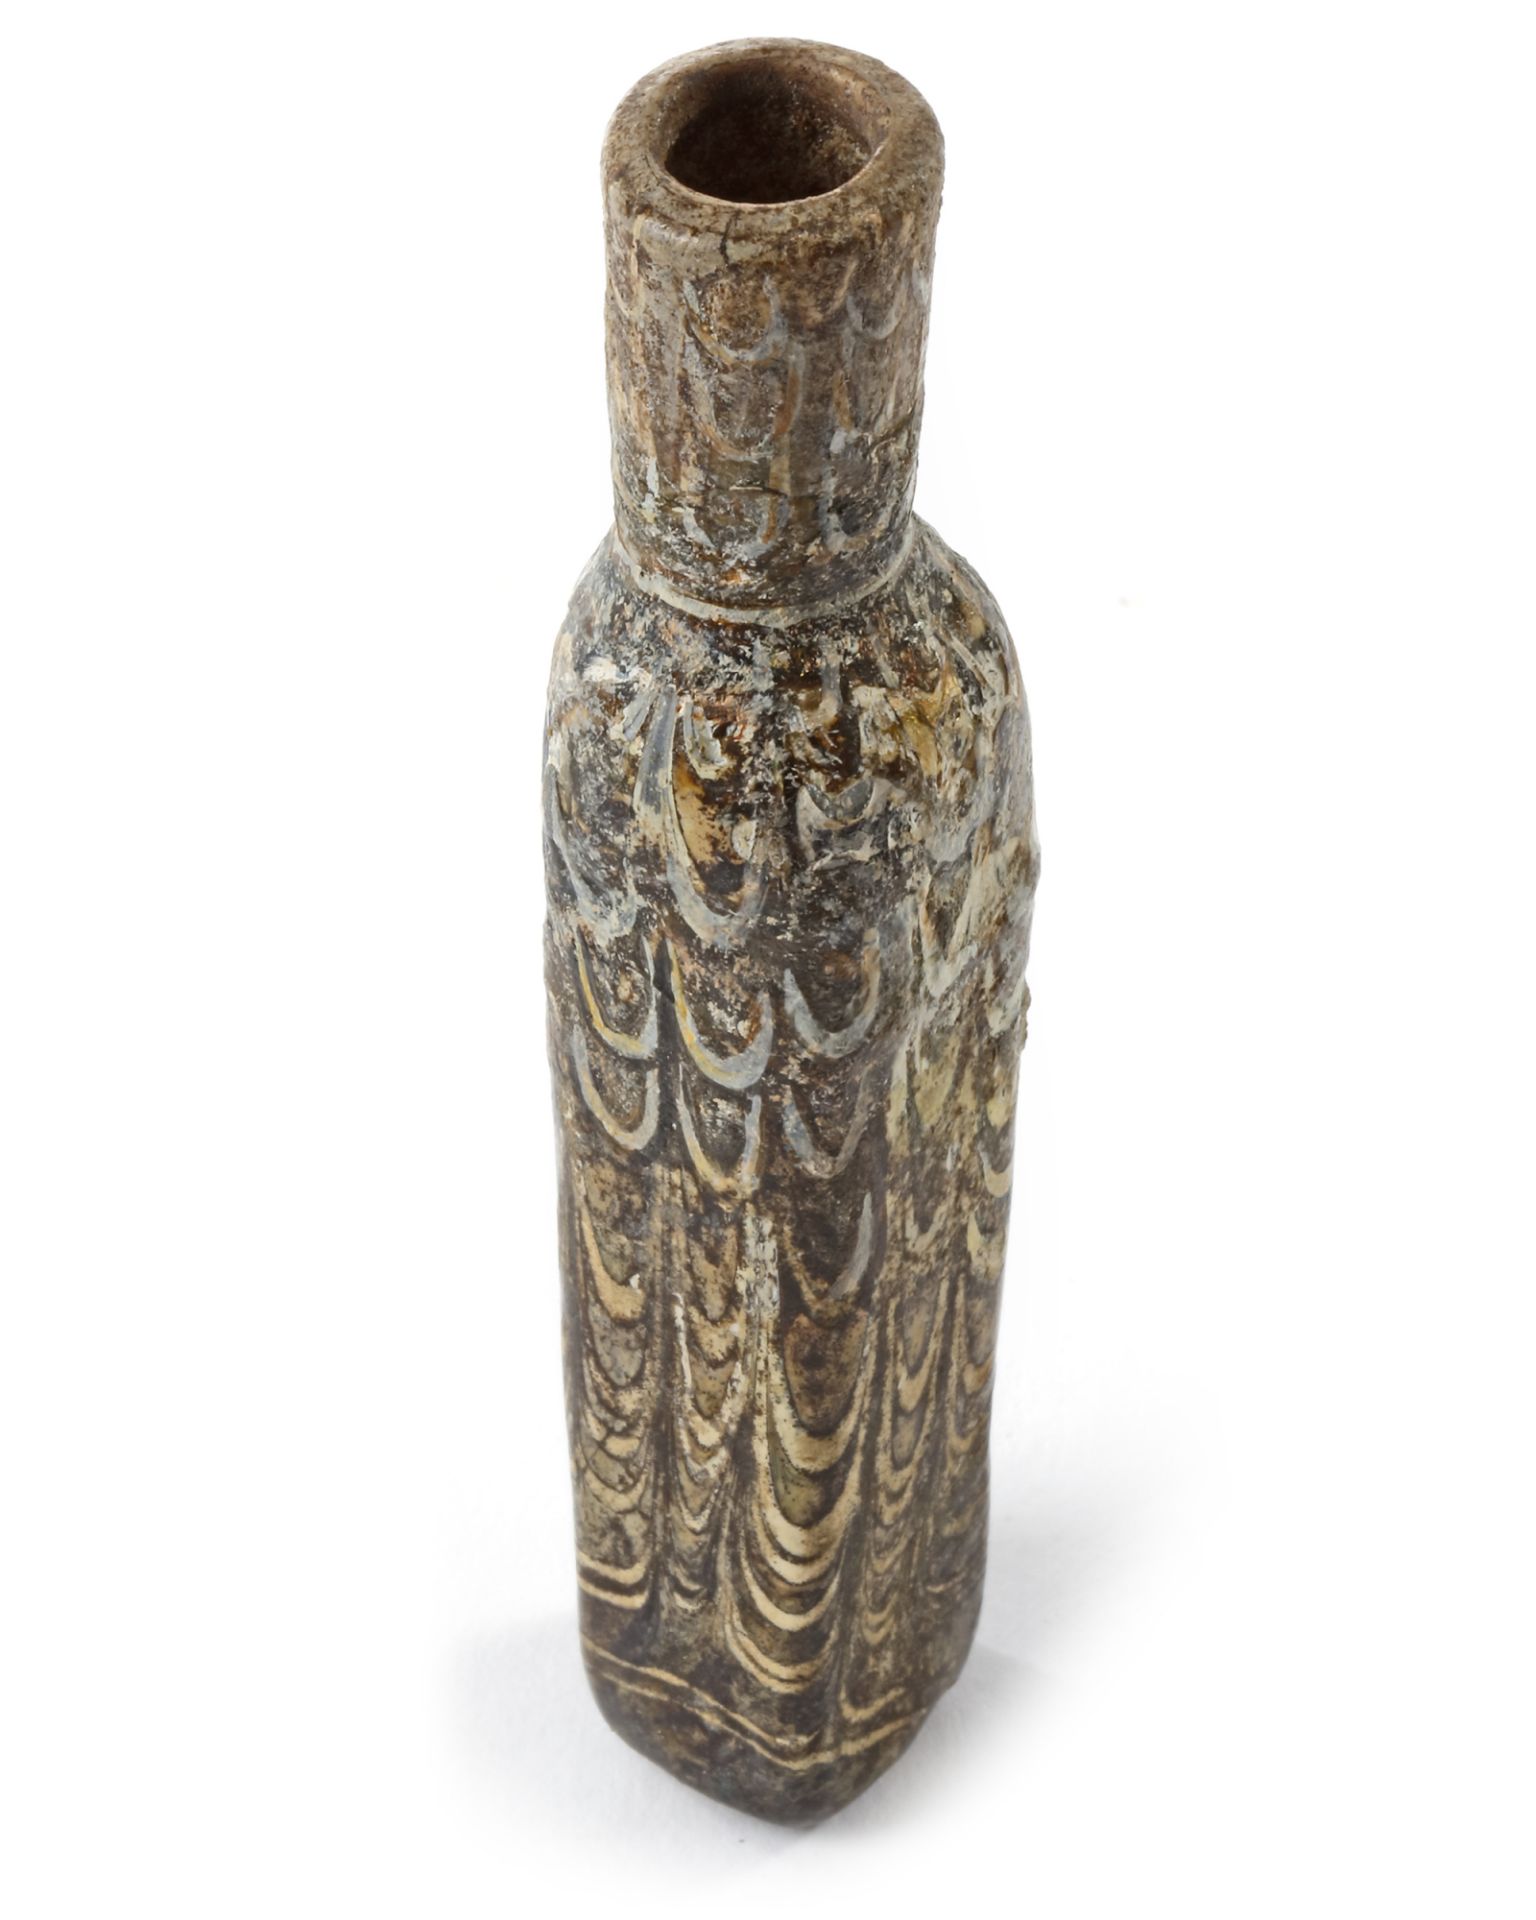 AN EARLY ISLAMIC GLASS BOTTLE EGYPT OR SYRIA, 7TH-8TH CENTURY - Image 3 of 5